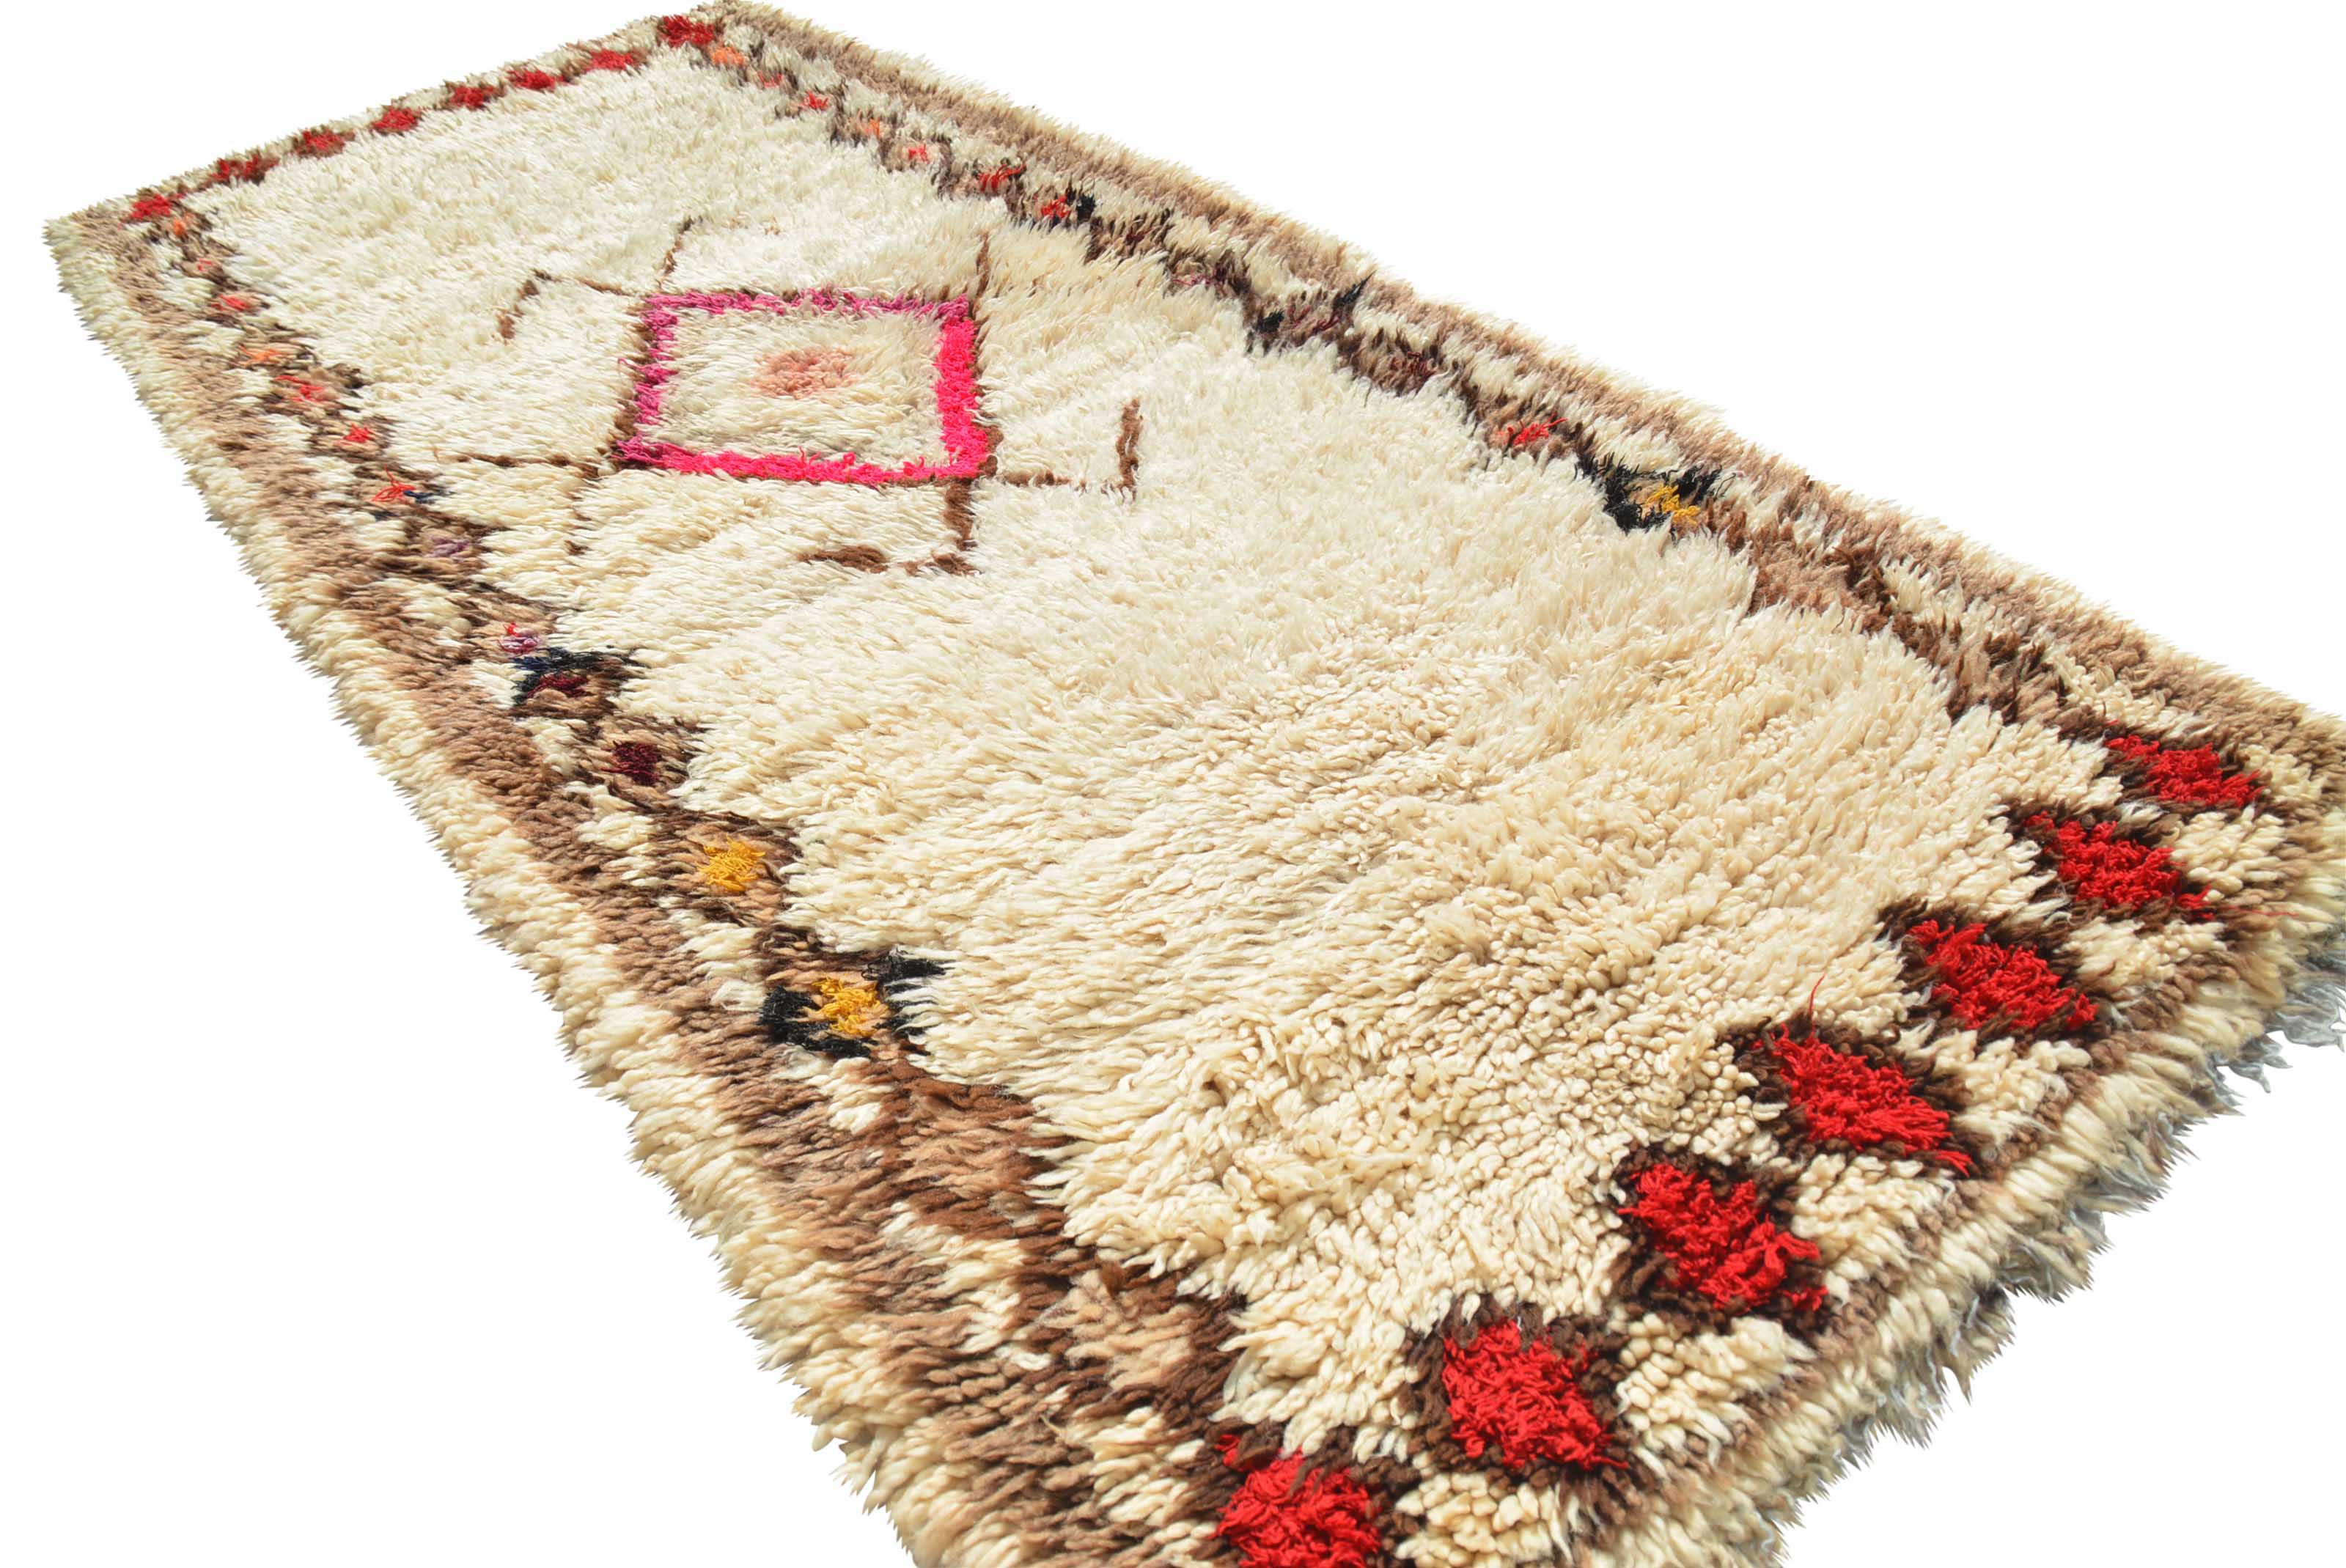 Vintage Moroccan Rug Vintage Rugs Cheap - Vintage Hand Knotted Rugs - Illuminate Collective illuminate collective